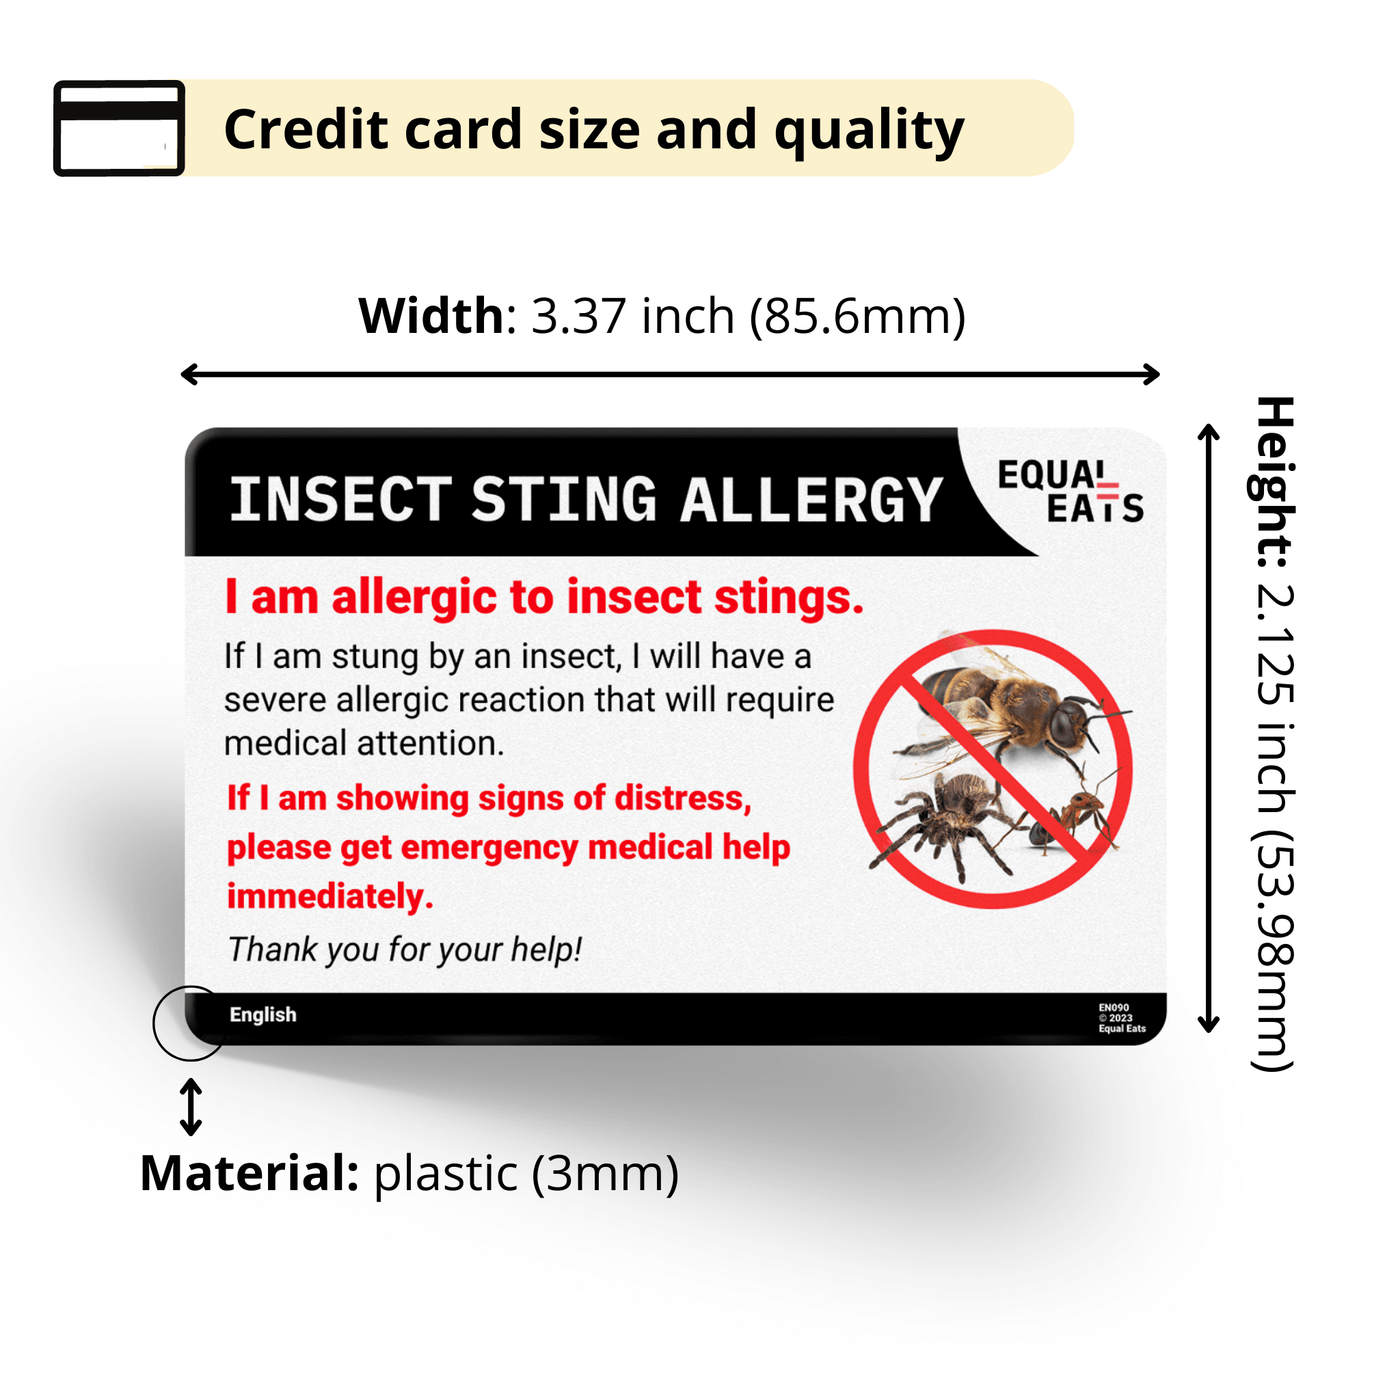 Macedonian Insect Sting Allergy Card